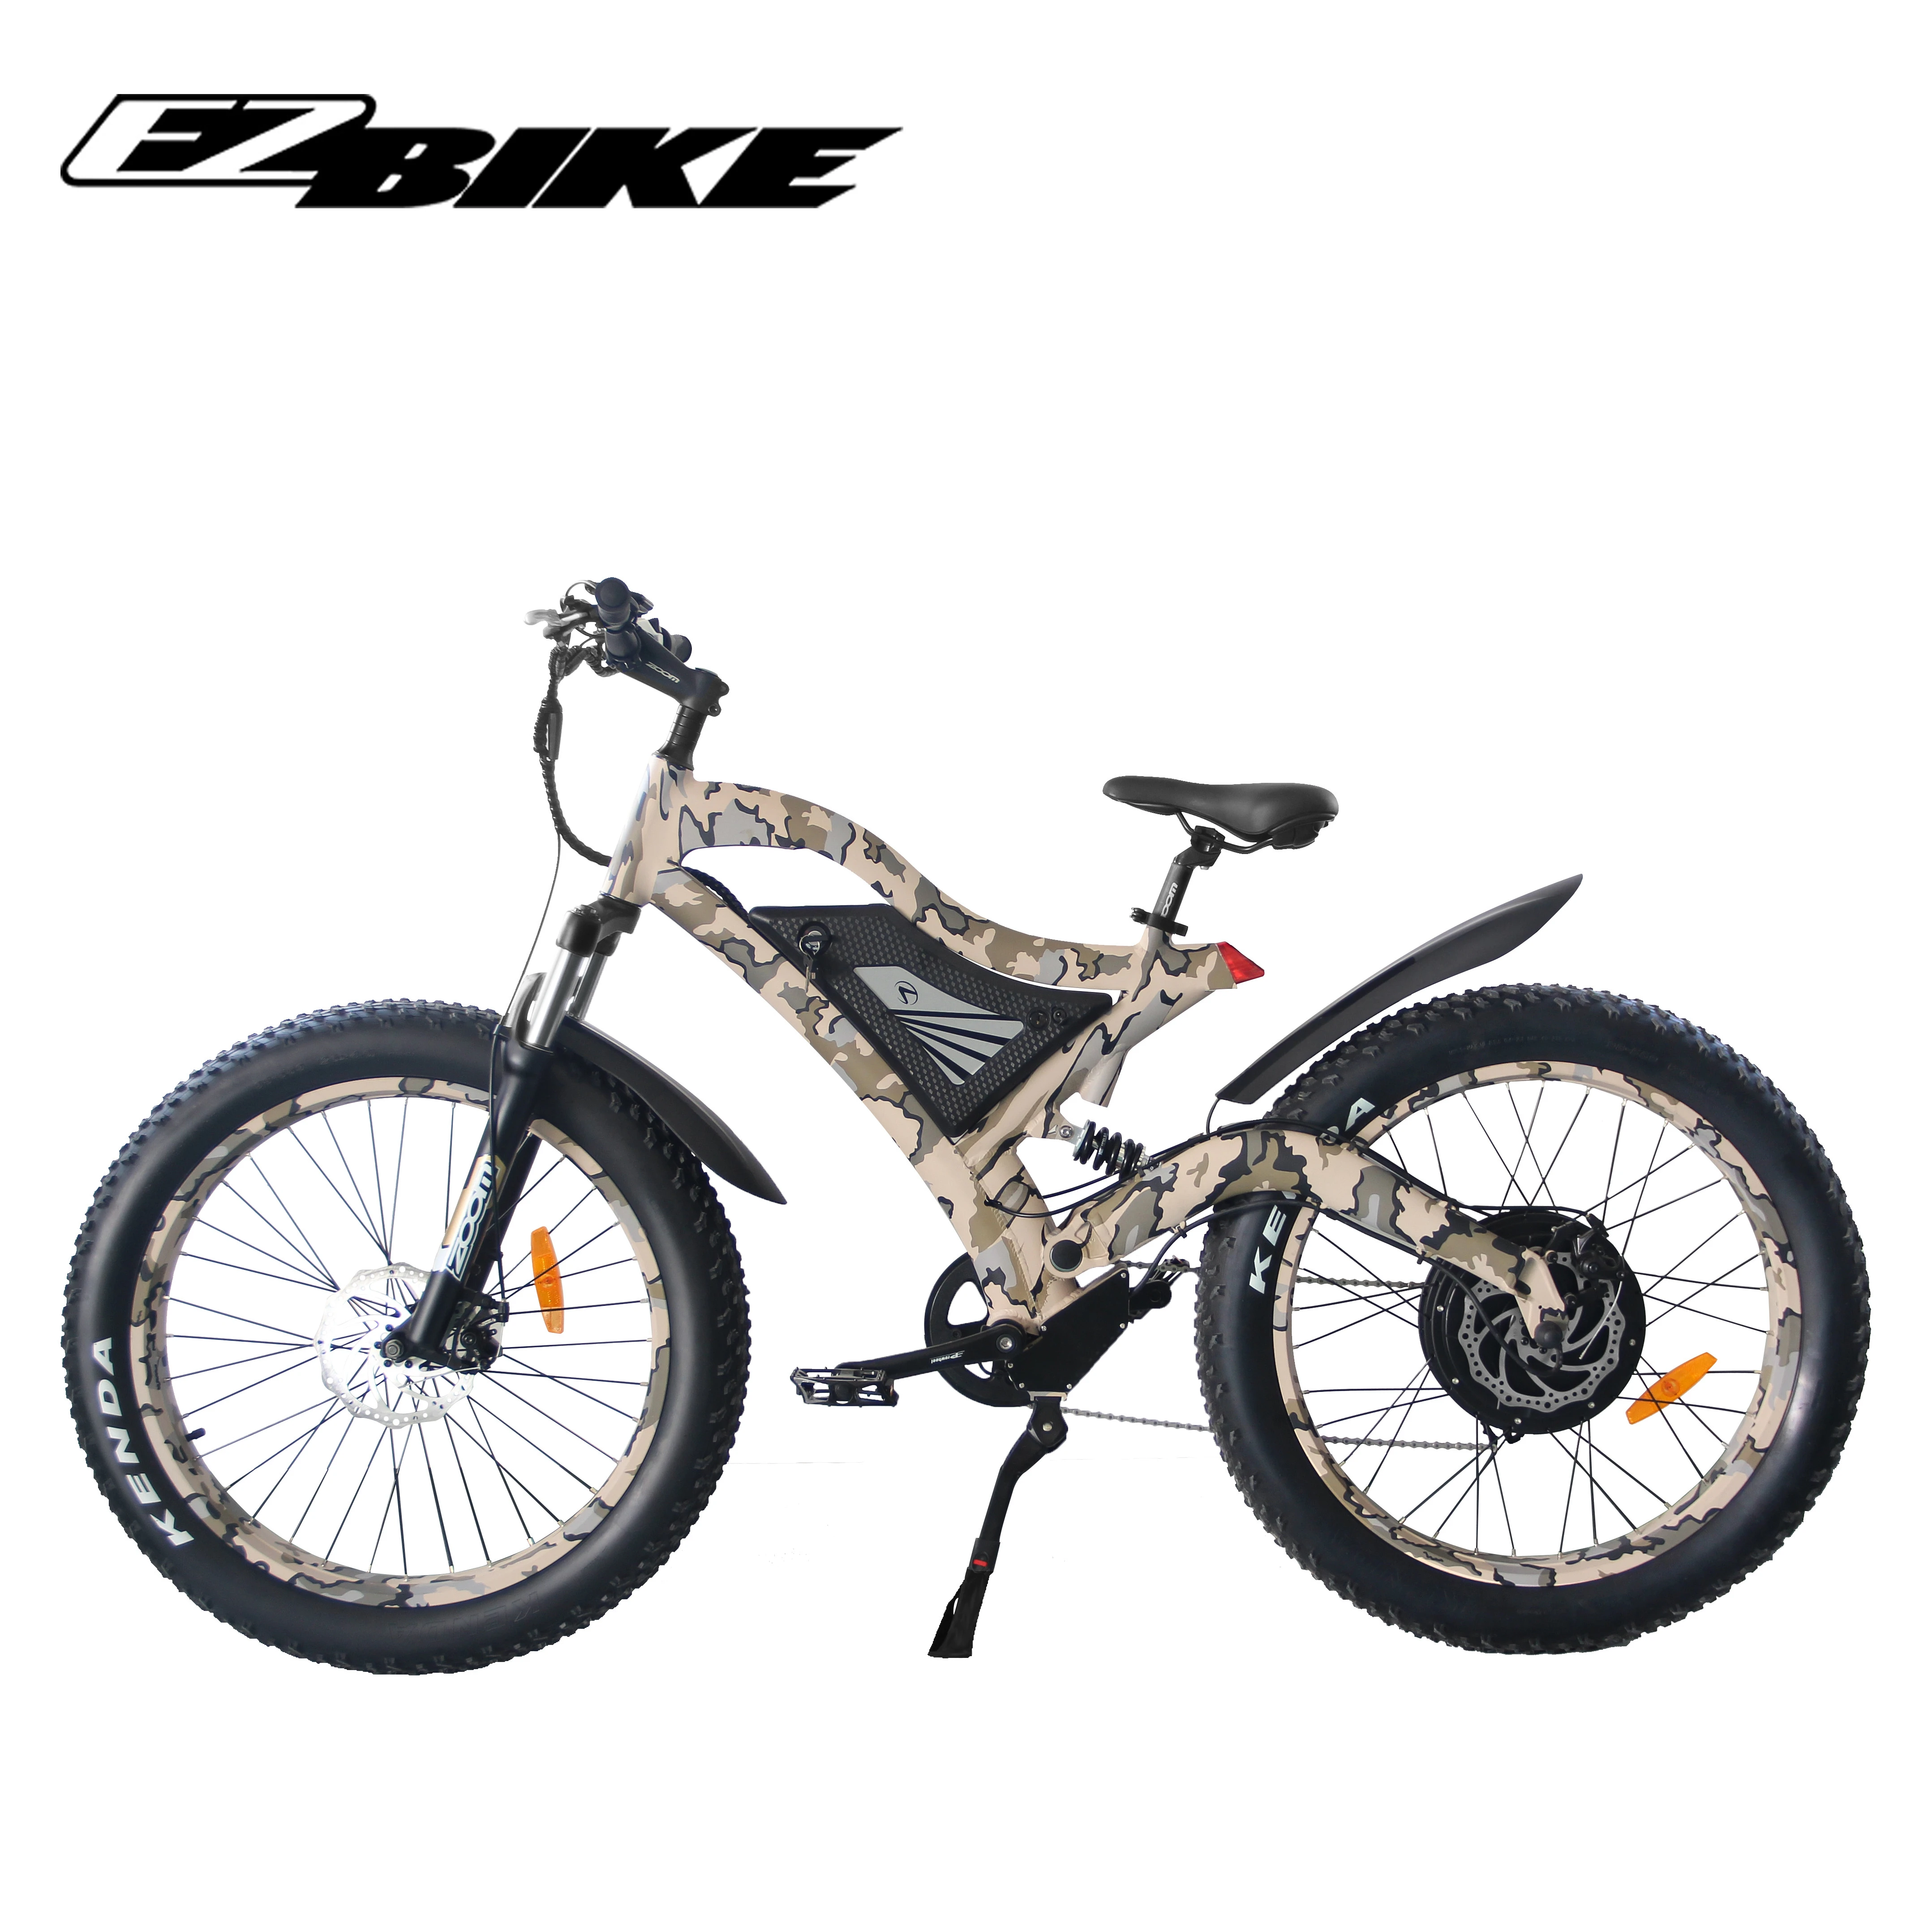 Fast speed 48 volts 1500 watts powerful dirt electric bicycle e bike for adults